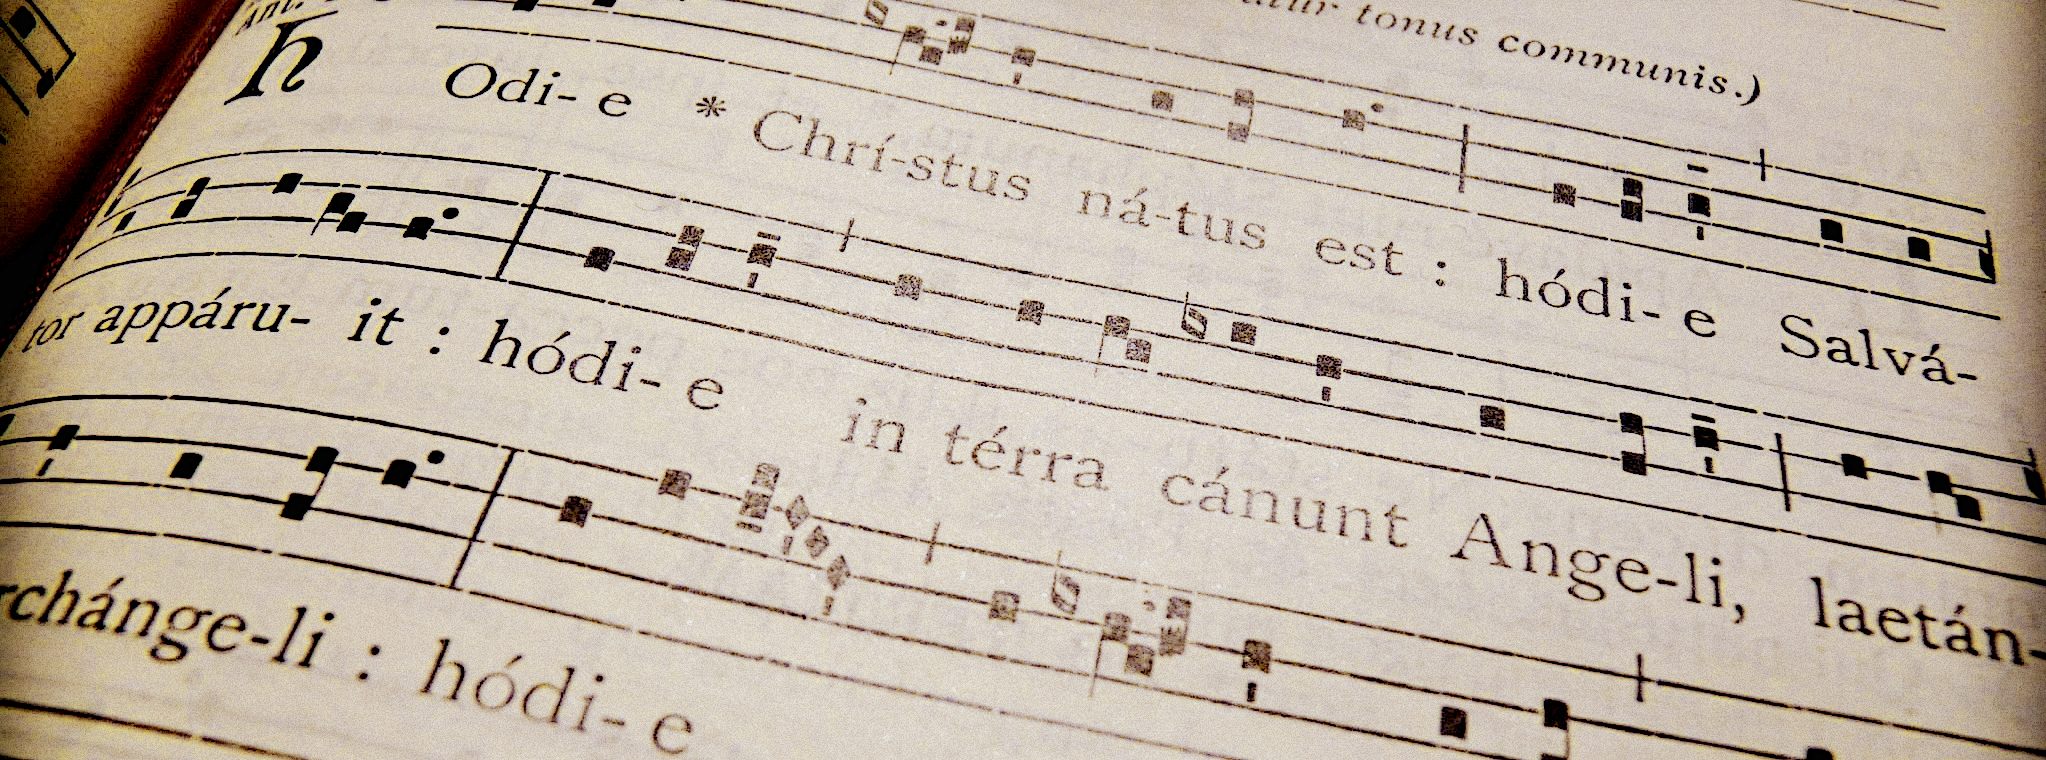 Some thoughts on liturgical music